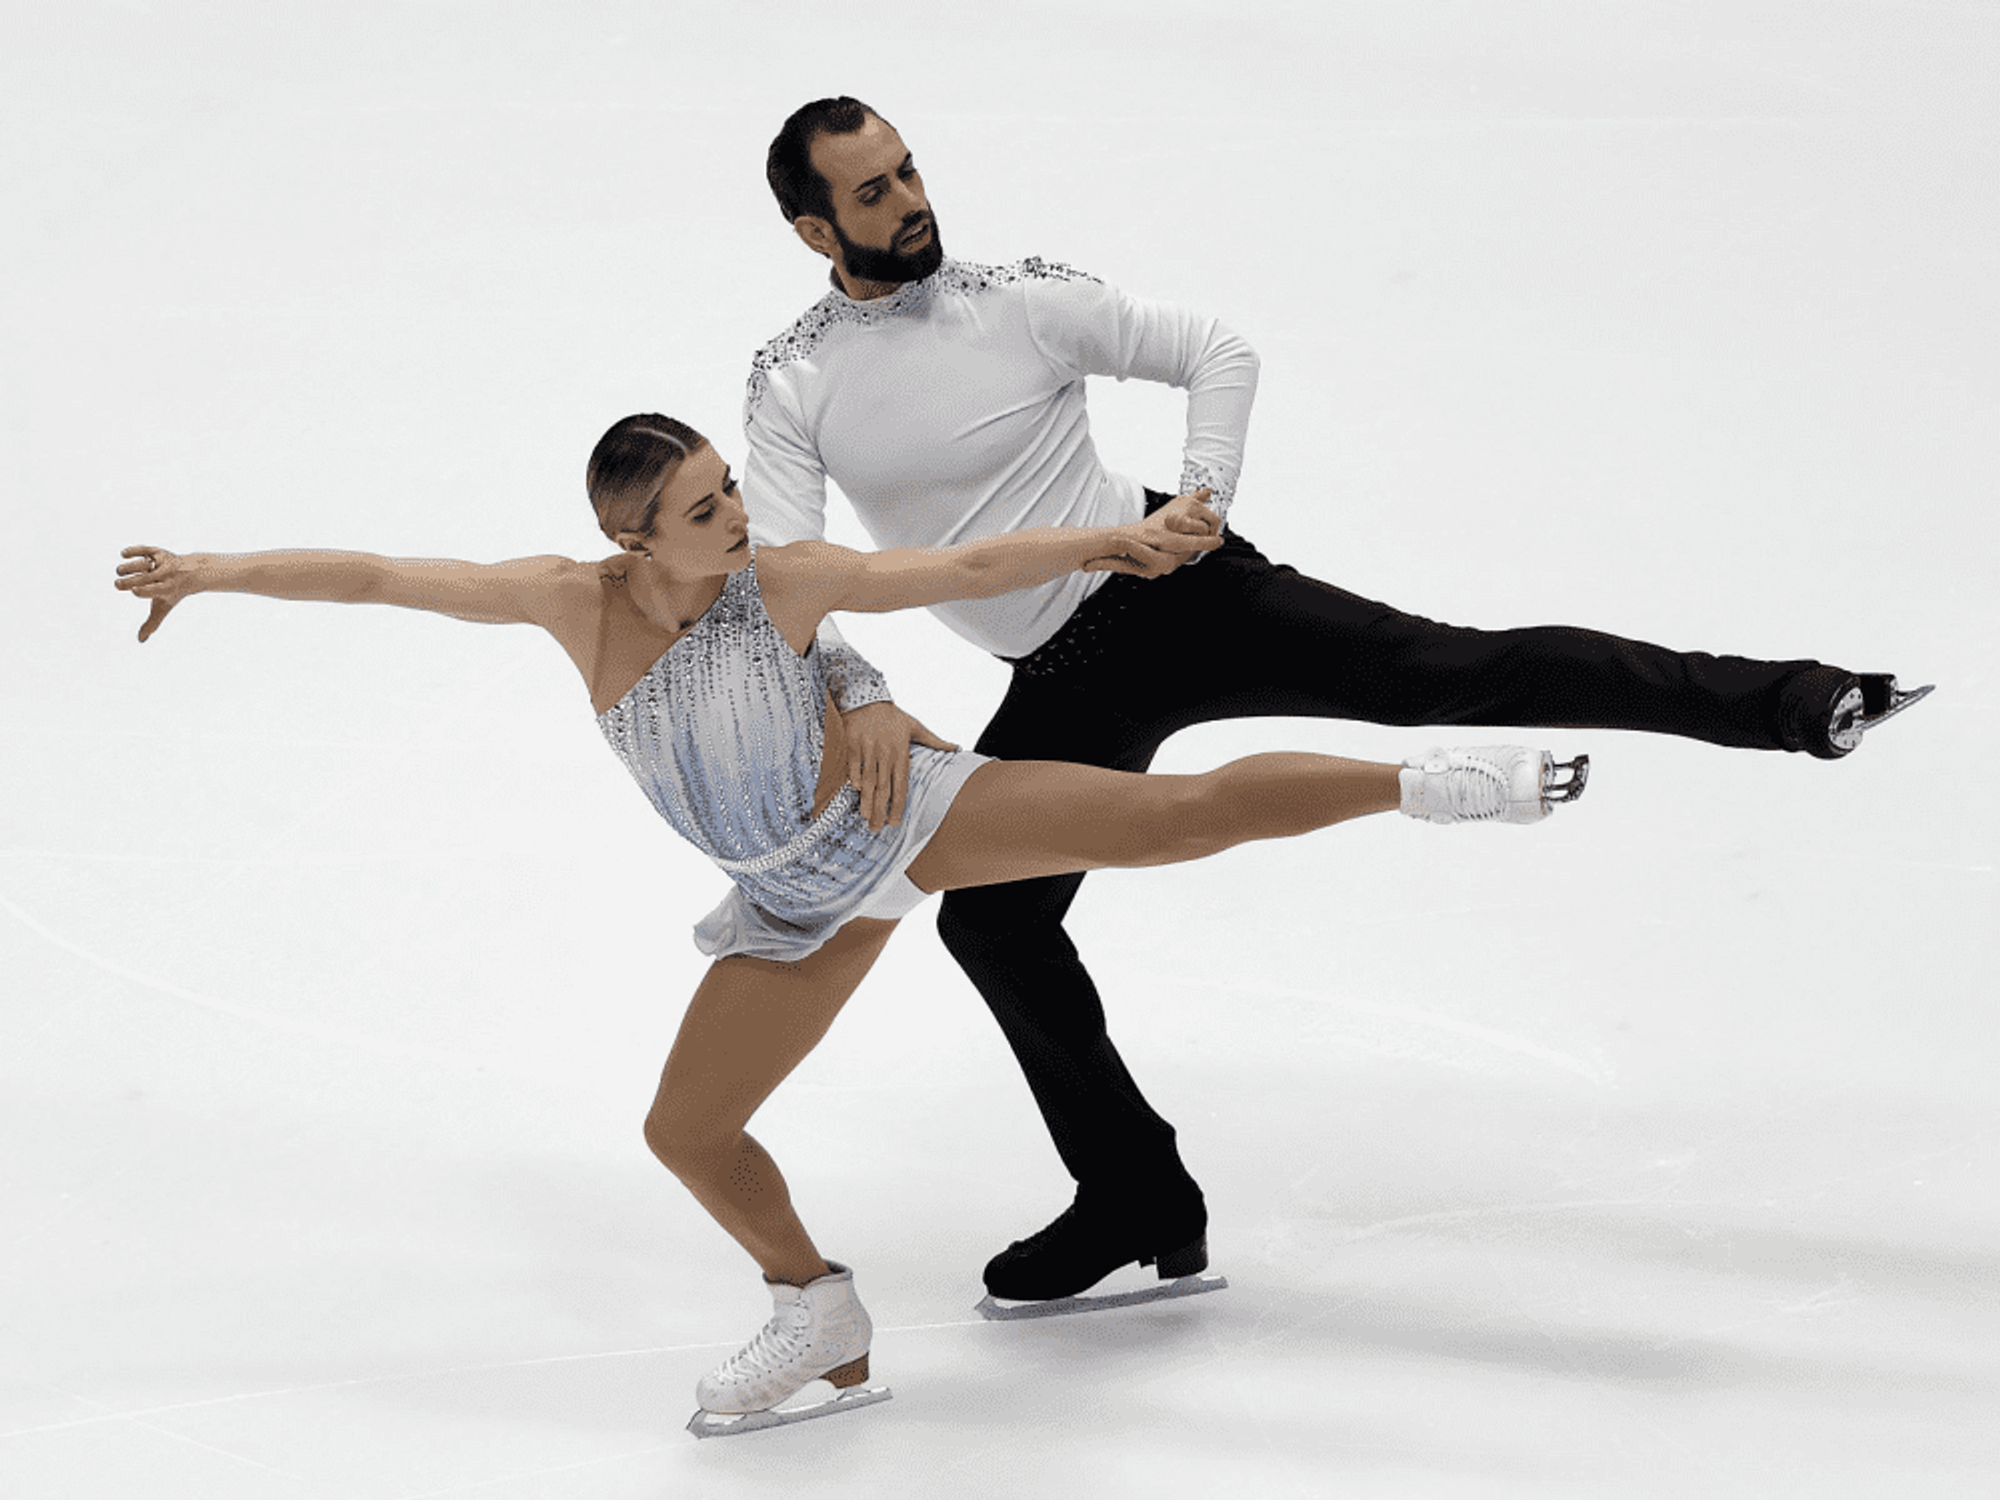 Pairs skaters Ashley Cain-Gribble and Timothy LeDuc are competing in their first Olympics.